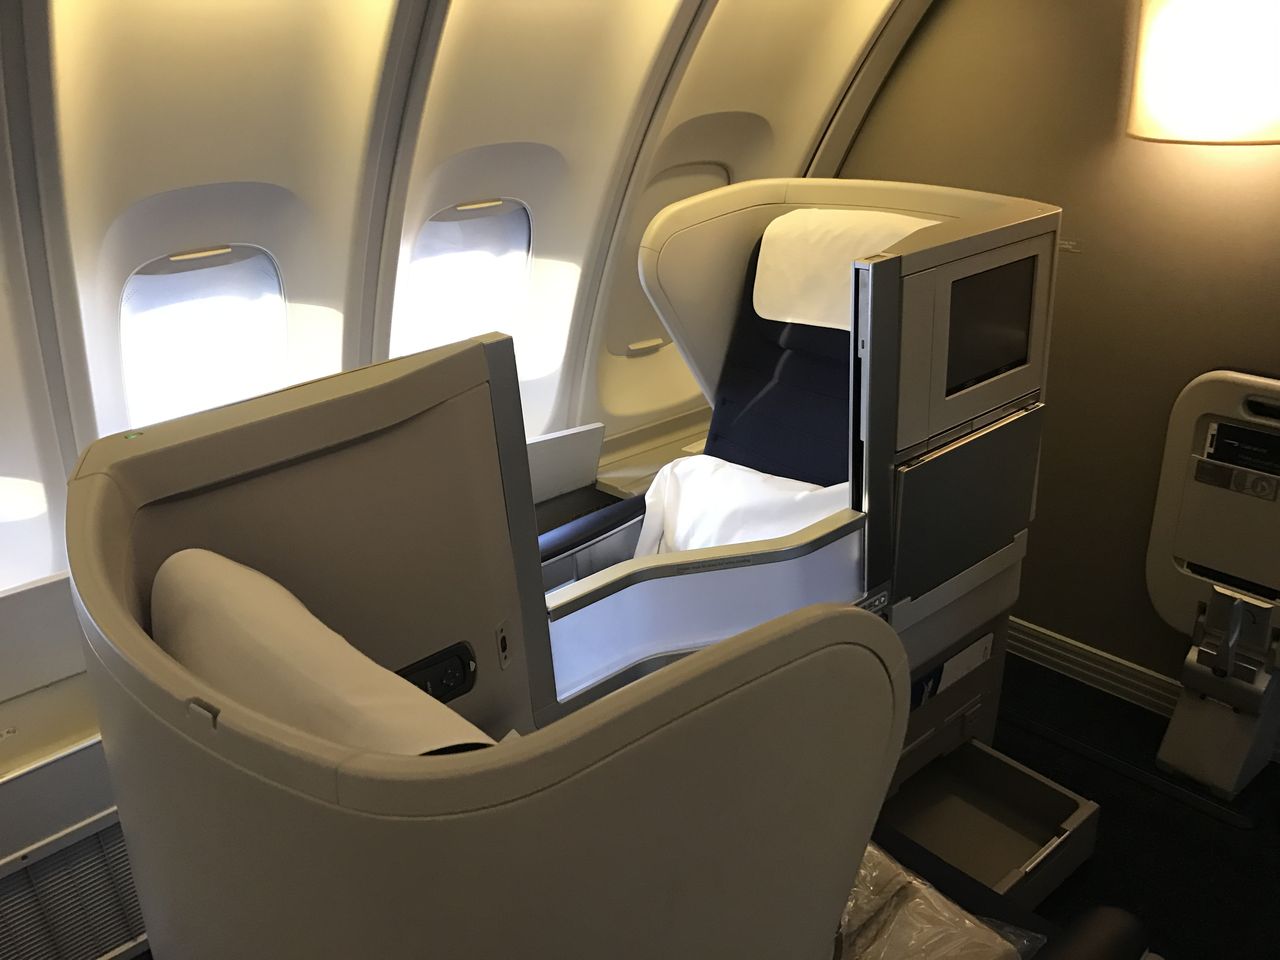 Review of British Airways flight from Miami to London in Business